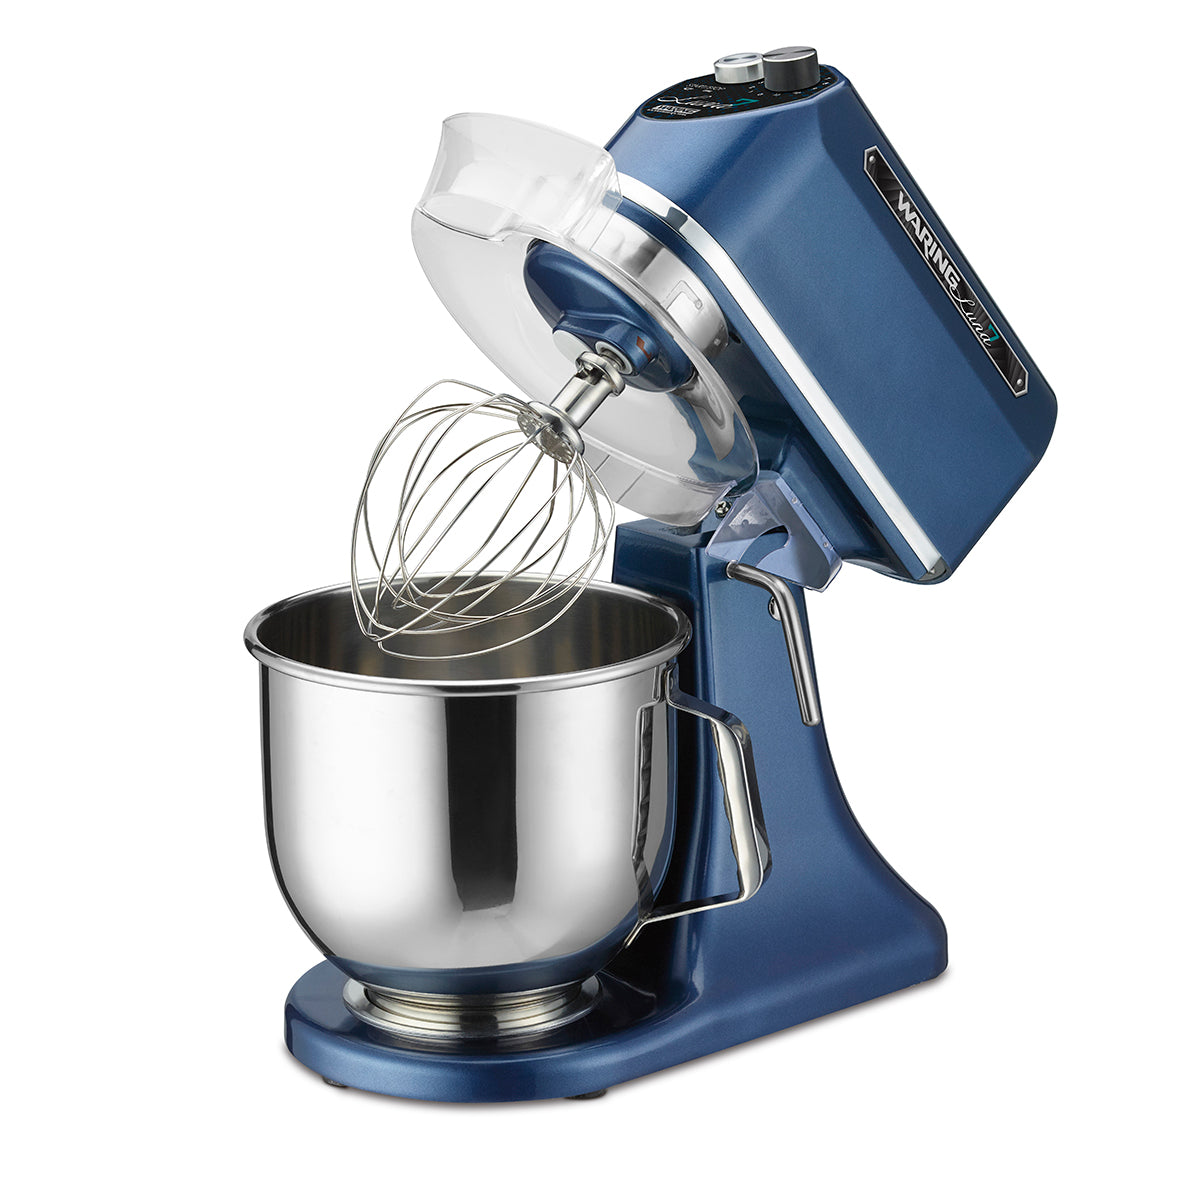 WSM7L "Luna Series" 7-Quart Planetary Mixer with Dough Hook, Mixing Paddle, & Whisk by Waring Commercial